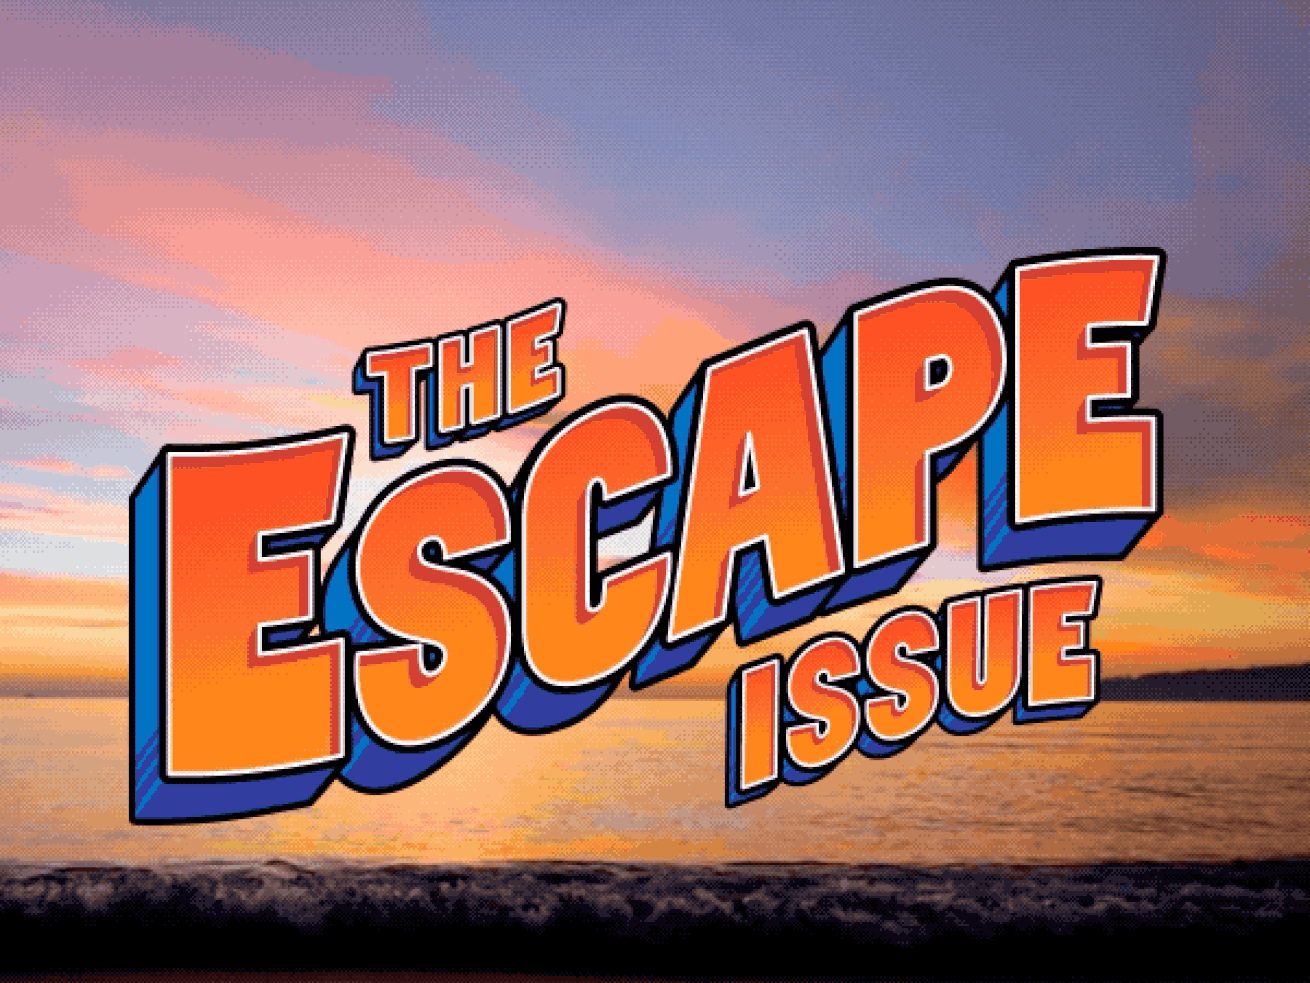 Welcome to the Escape Issue of The Highlight